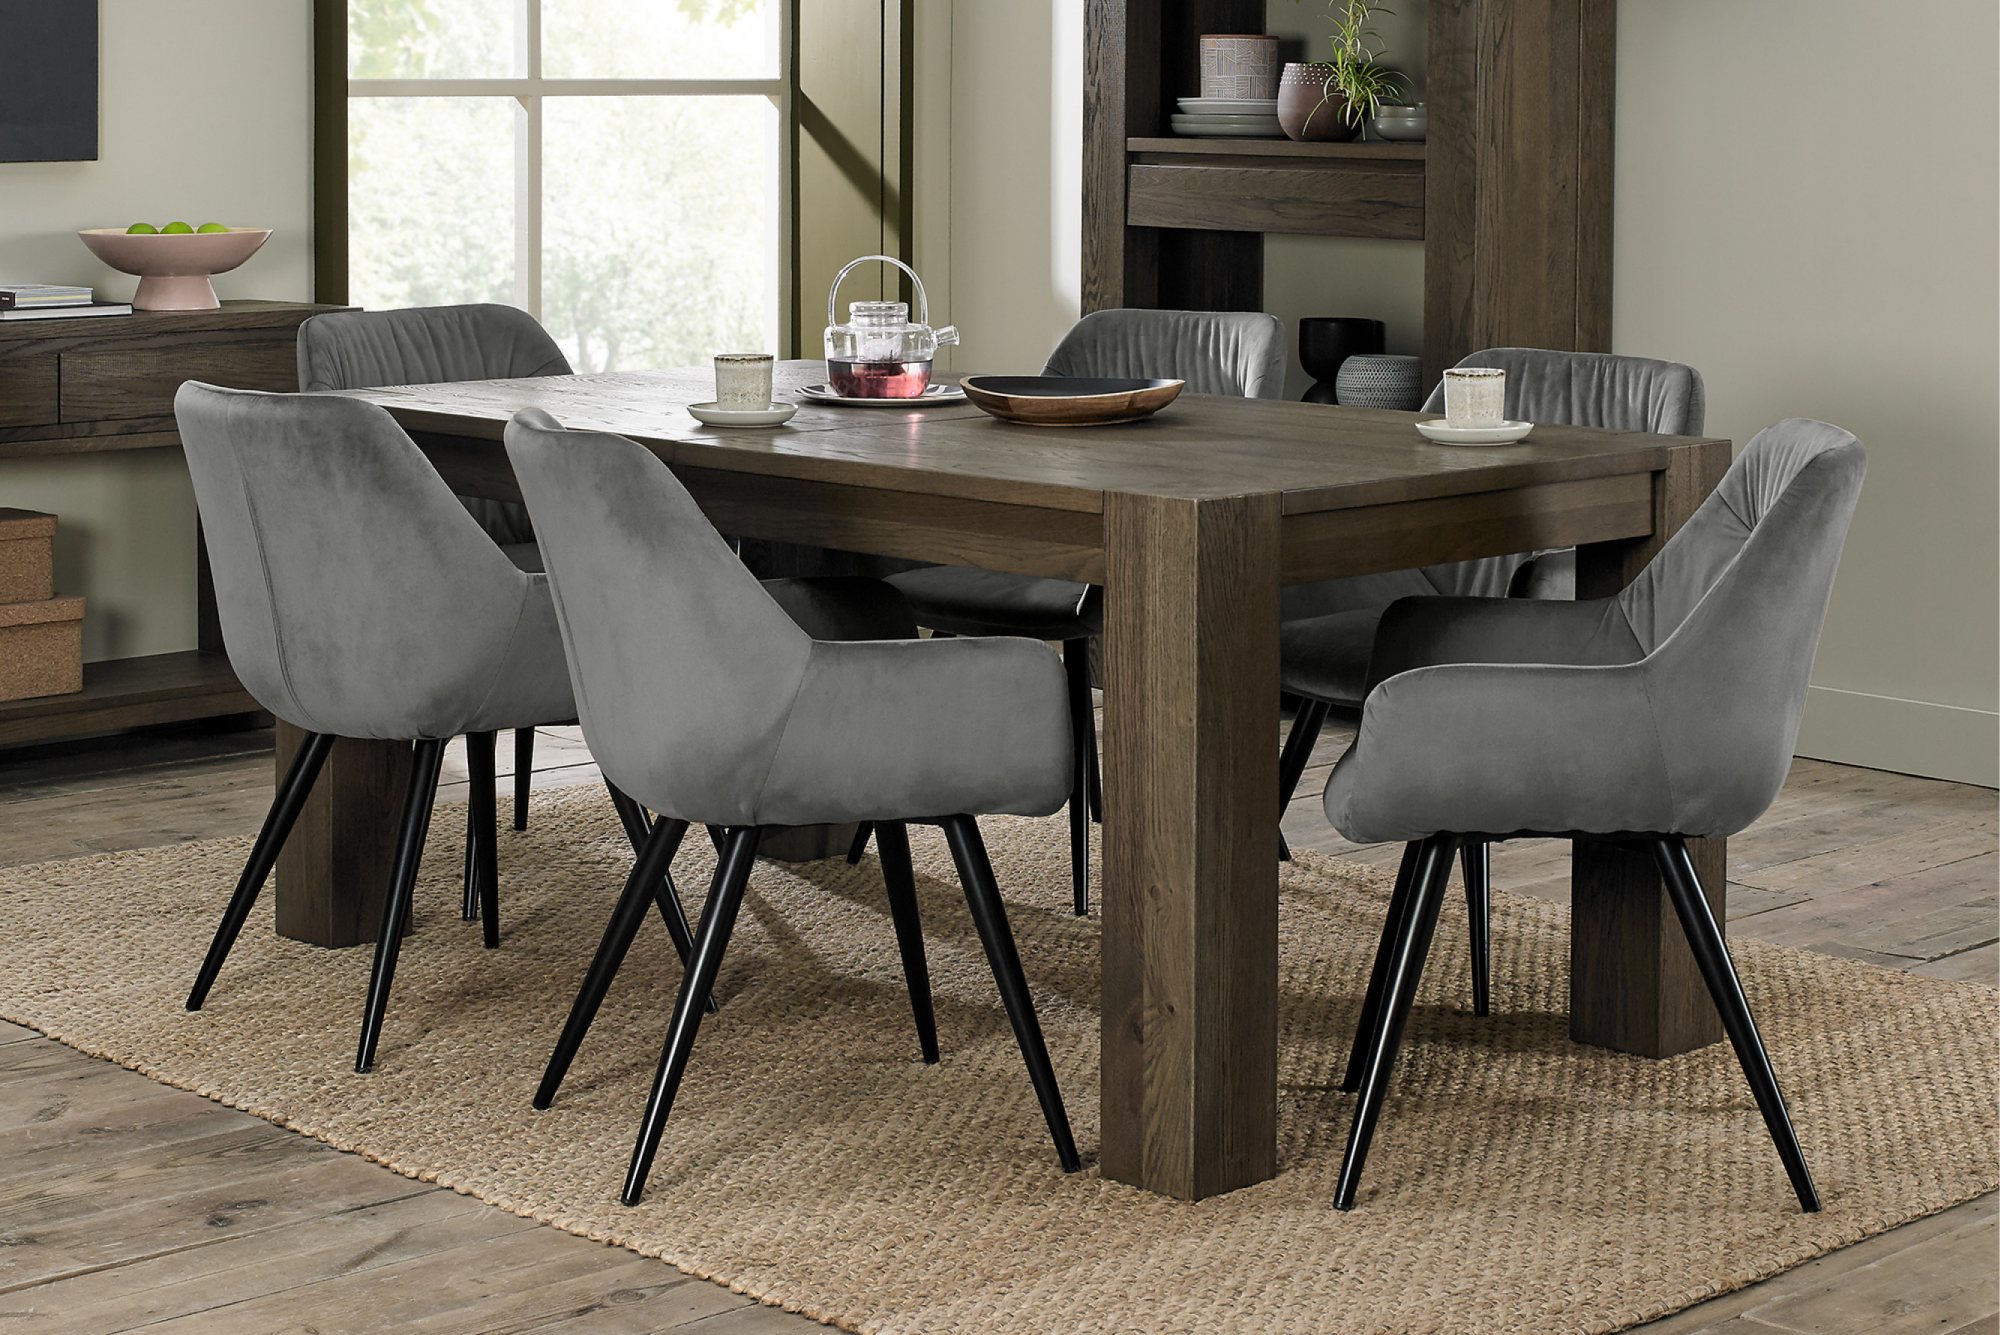 Home Origins Constable Fumed Oak 6-8 Seater Extending Dining Set- 6 Dali Dining Chairs- Grey Velvet Fabric